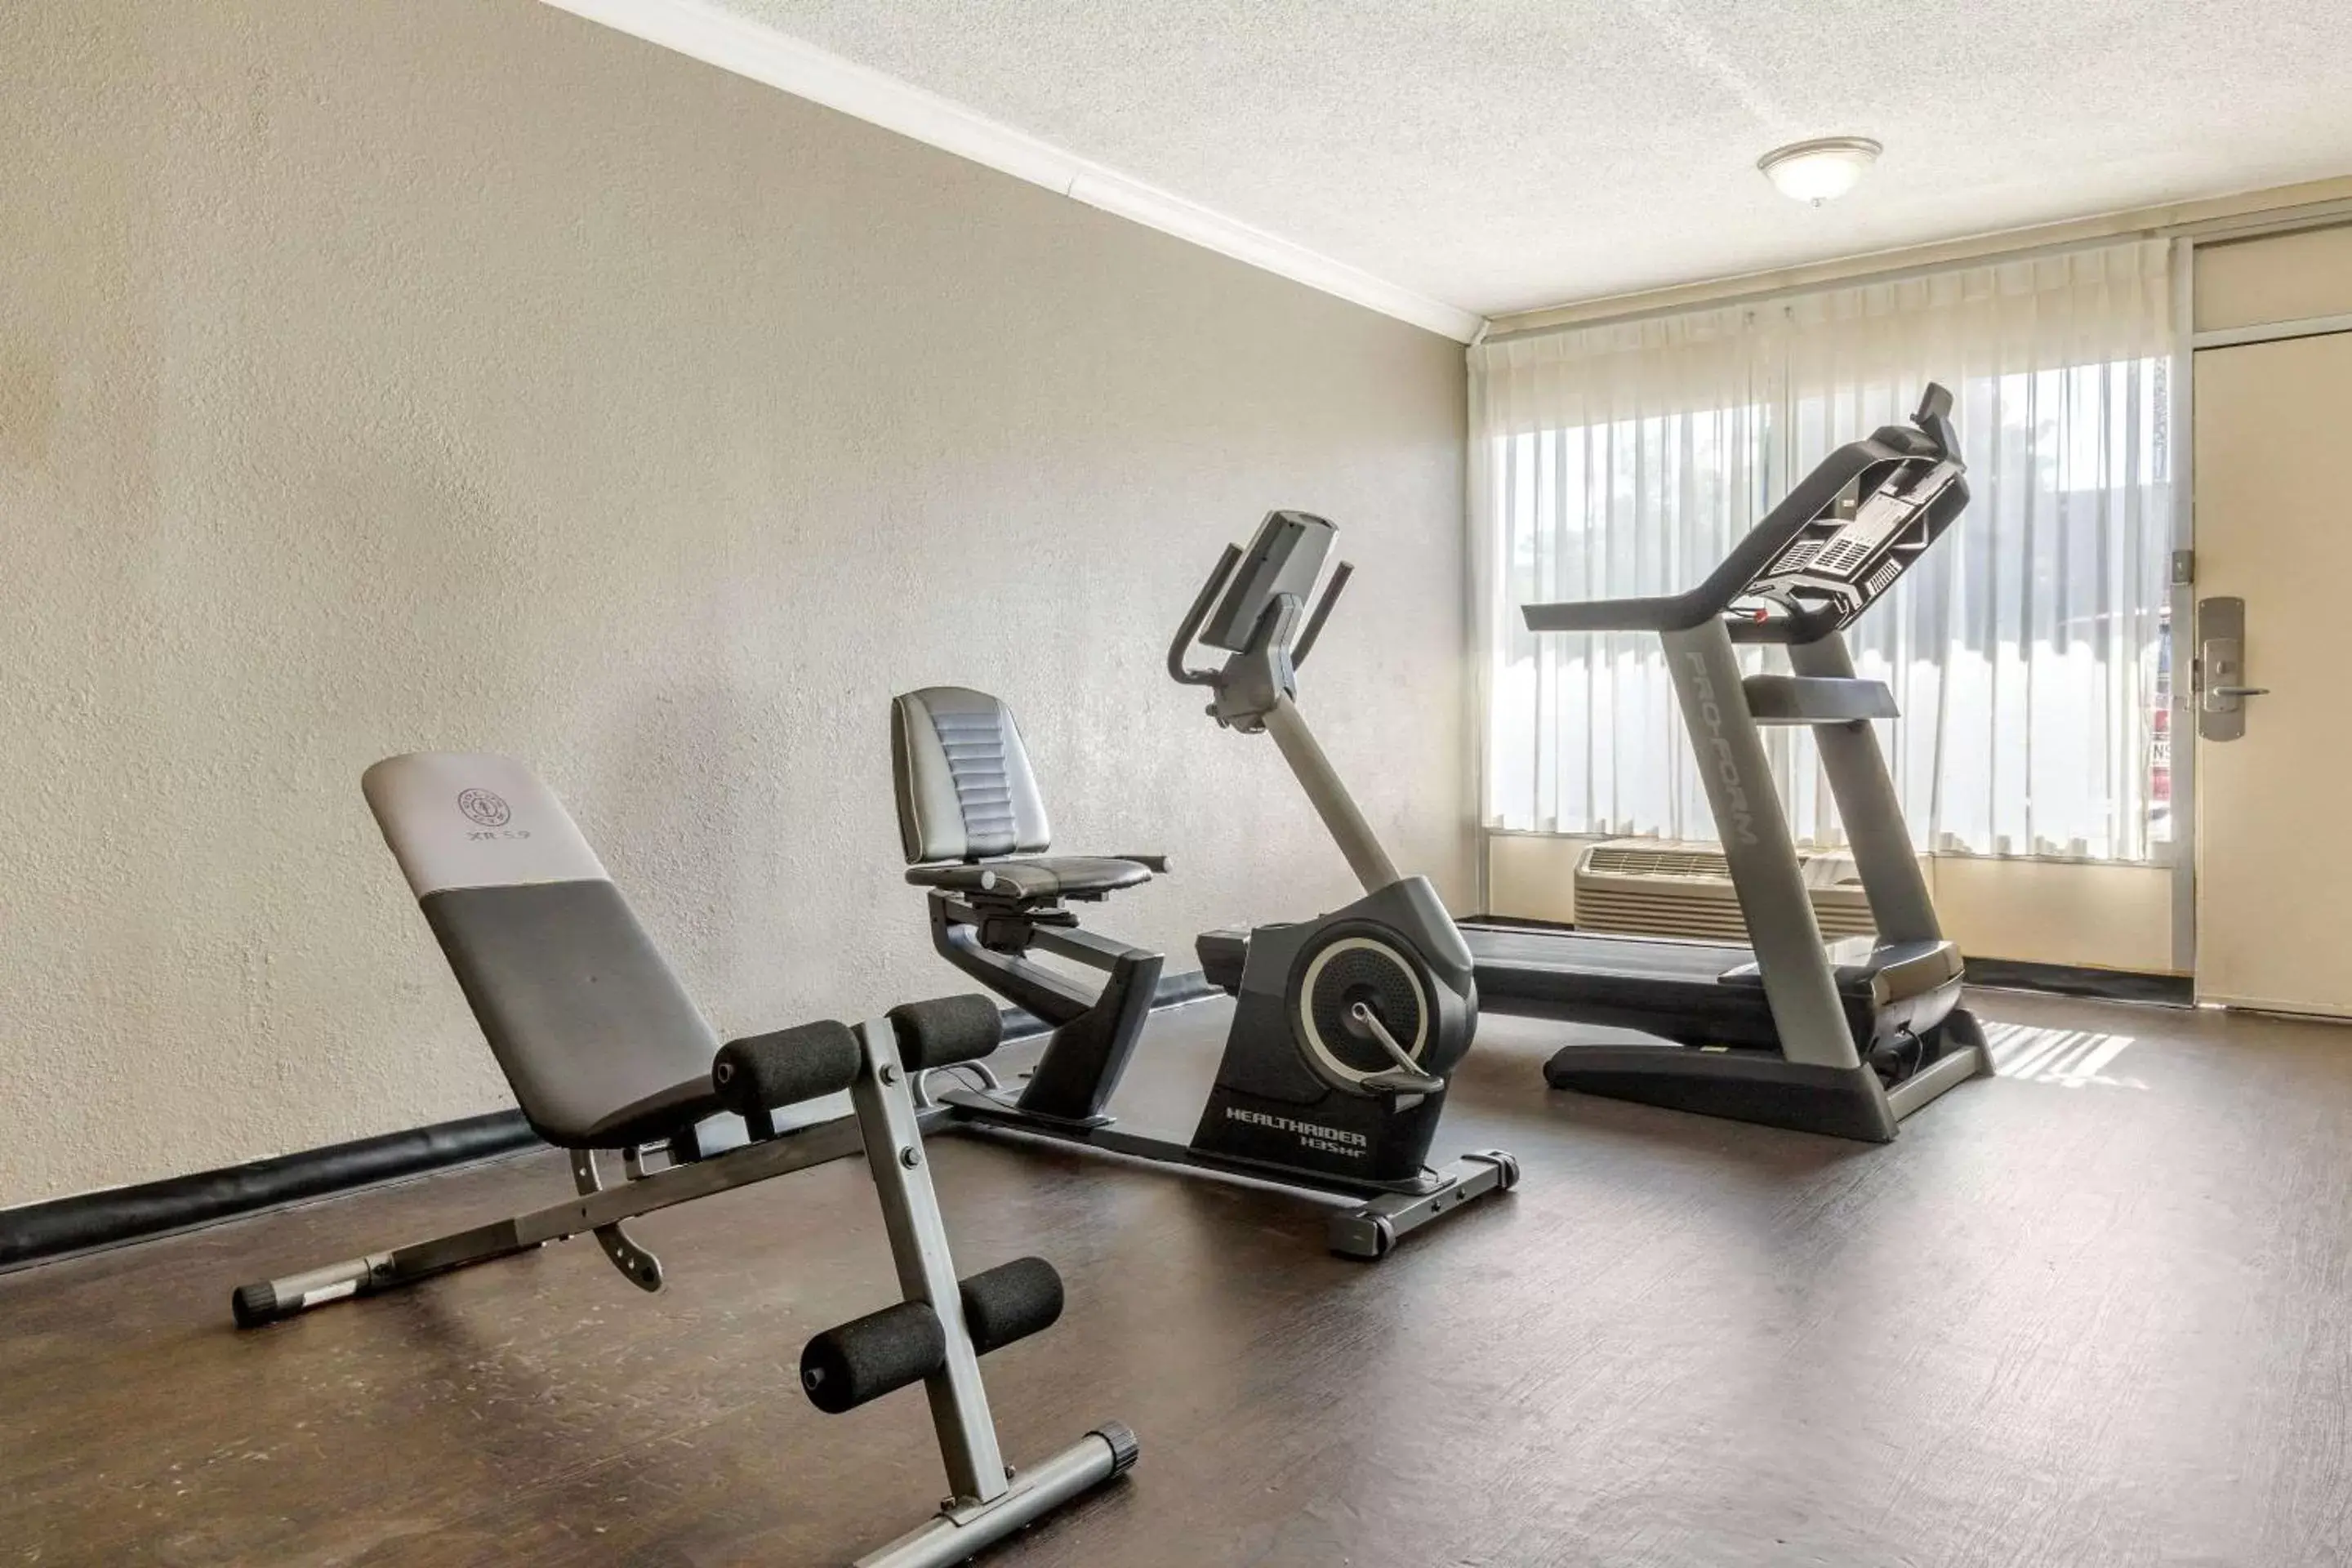 Fitness centre/facilities, Fitness Center/Facilities in Quality Inn Airport South